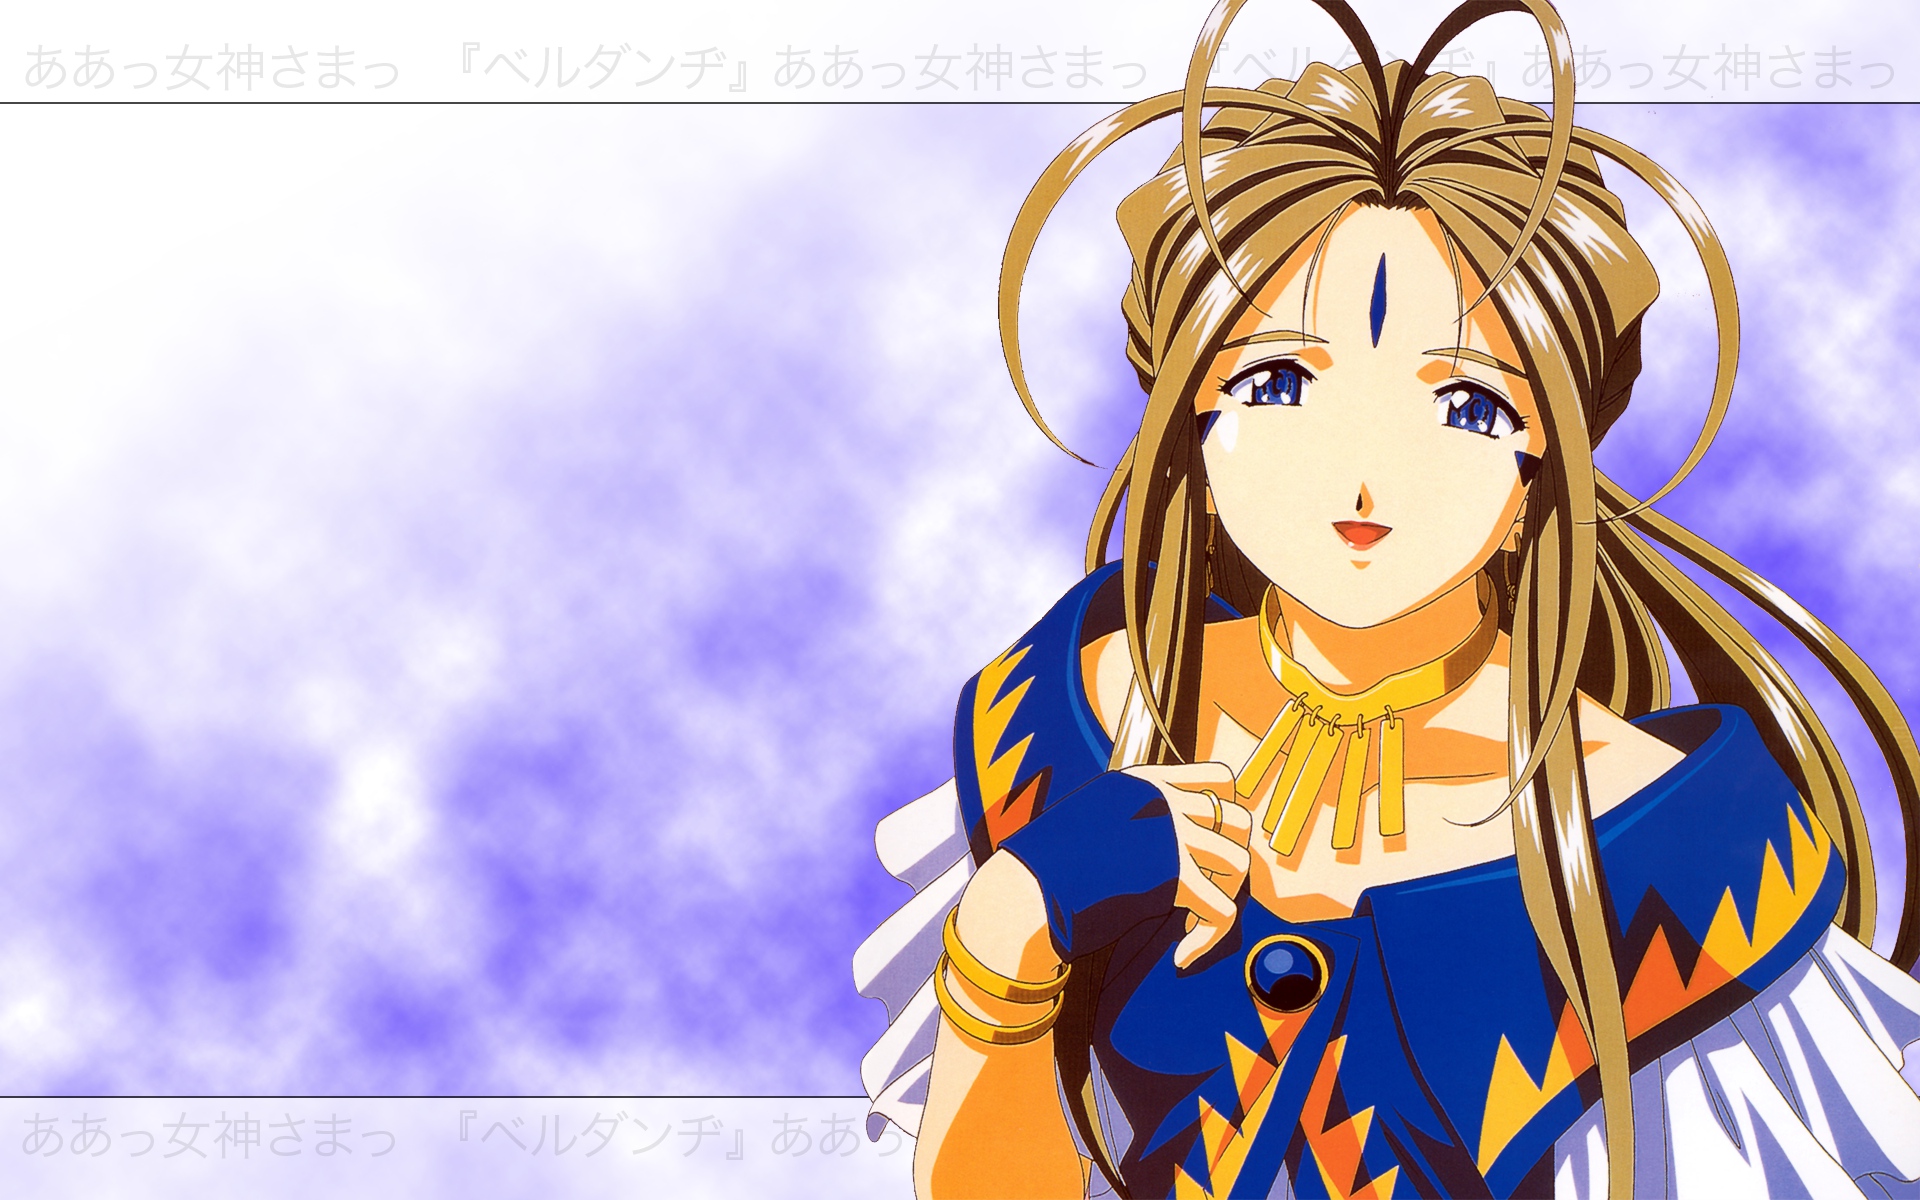 Belldandy, the beloved character from Ah! My Goddess, graces this anime-themed desktop wallpaper.